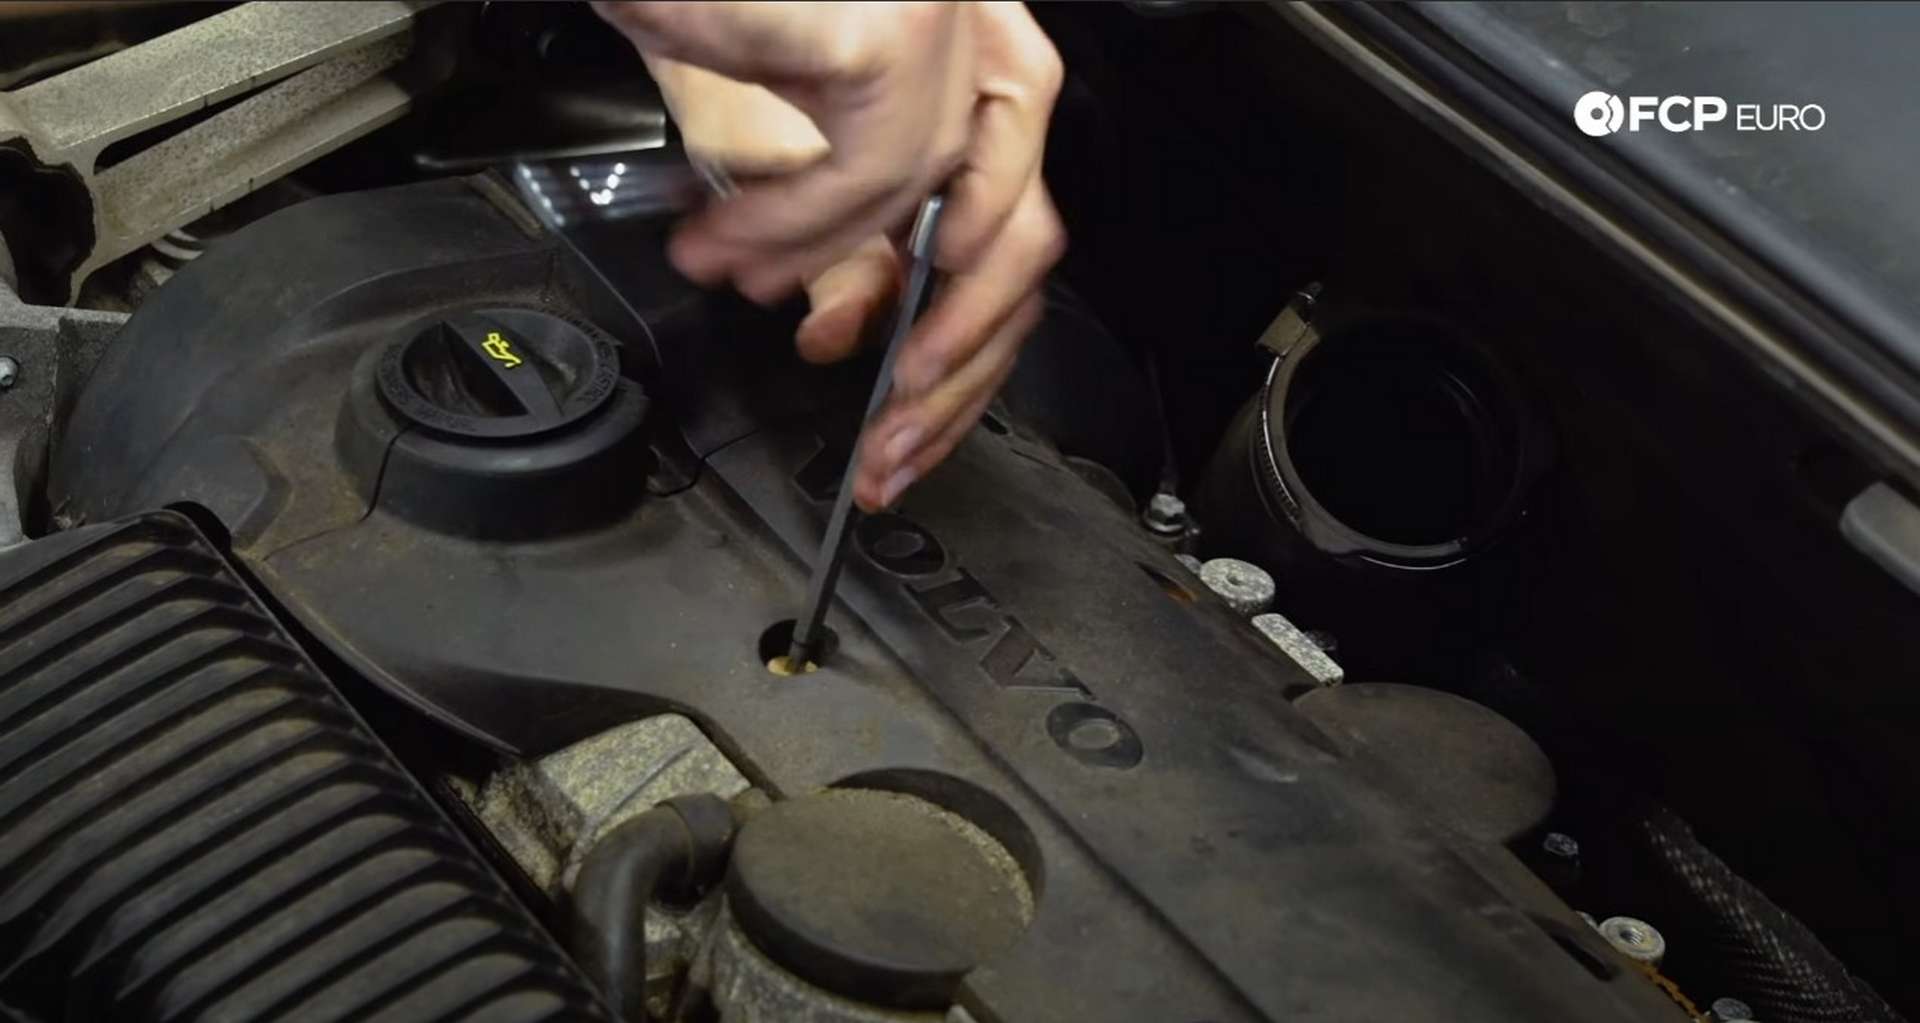 DIY Volvo Spark Plug and Ignition Coil Replacement refitting the ignition coil cover